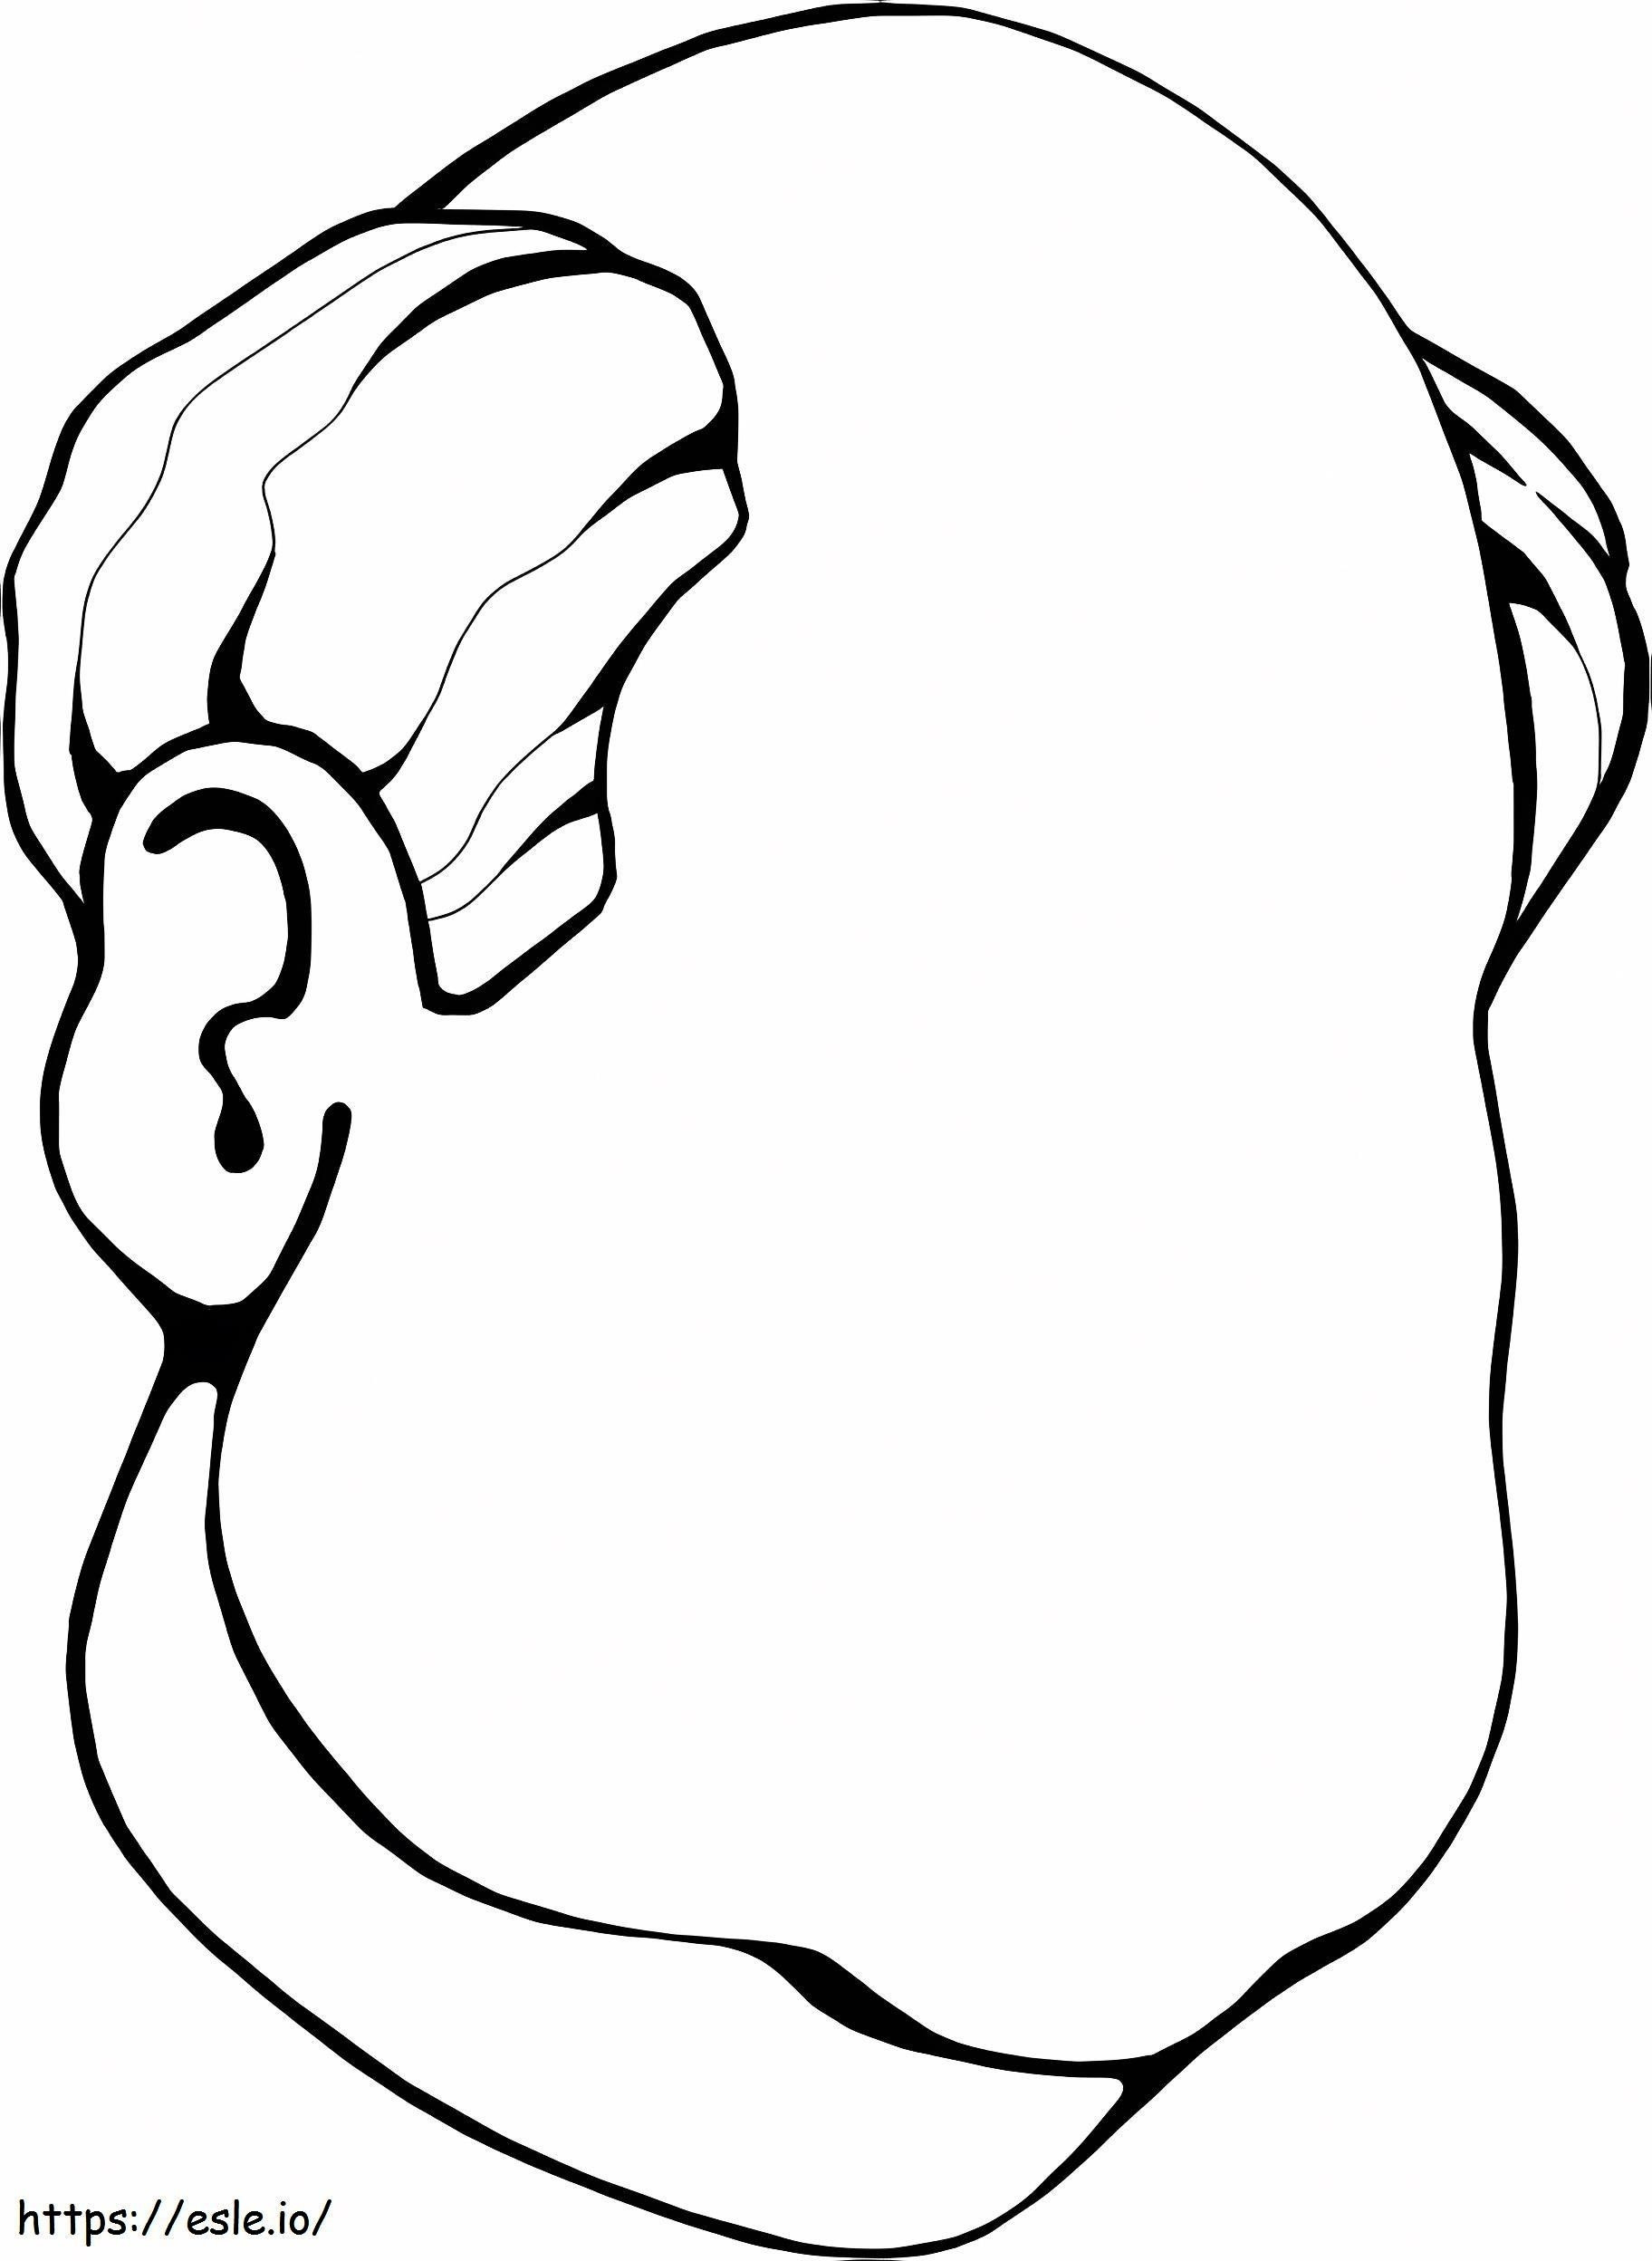 Old Man Blank Face coloring page